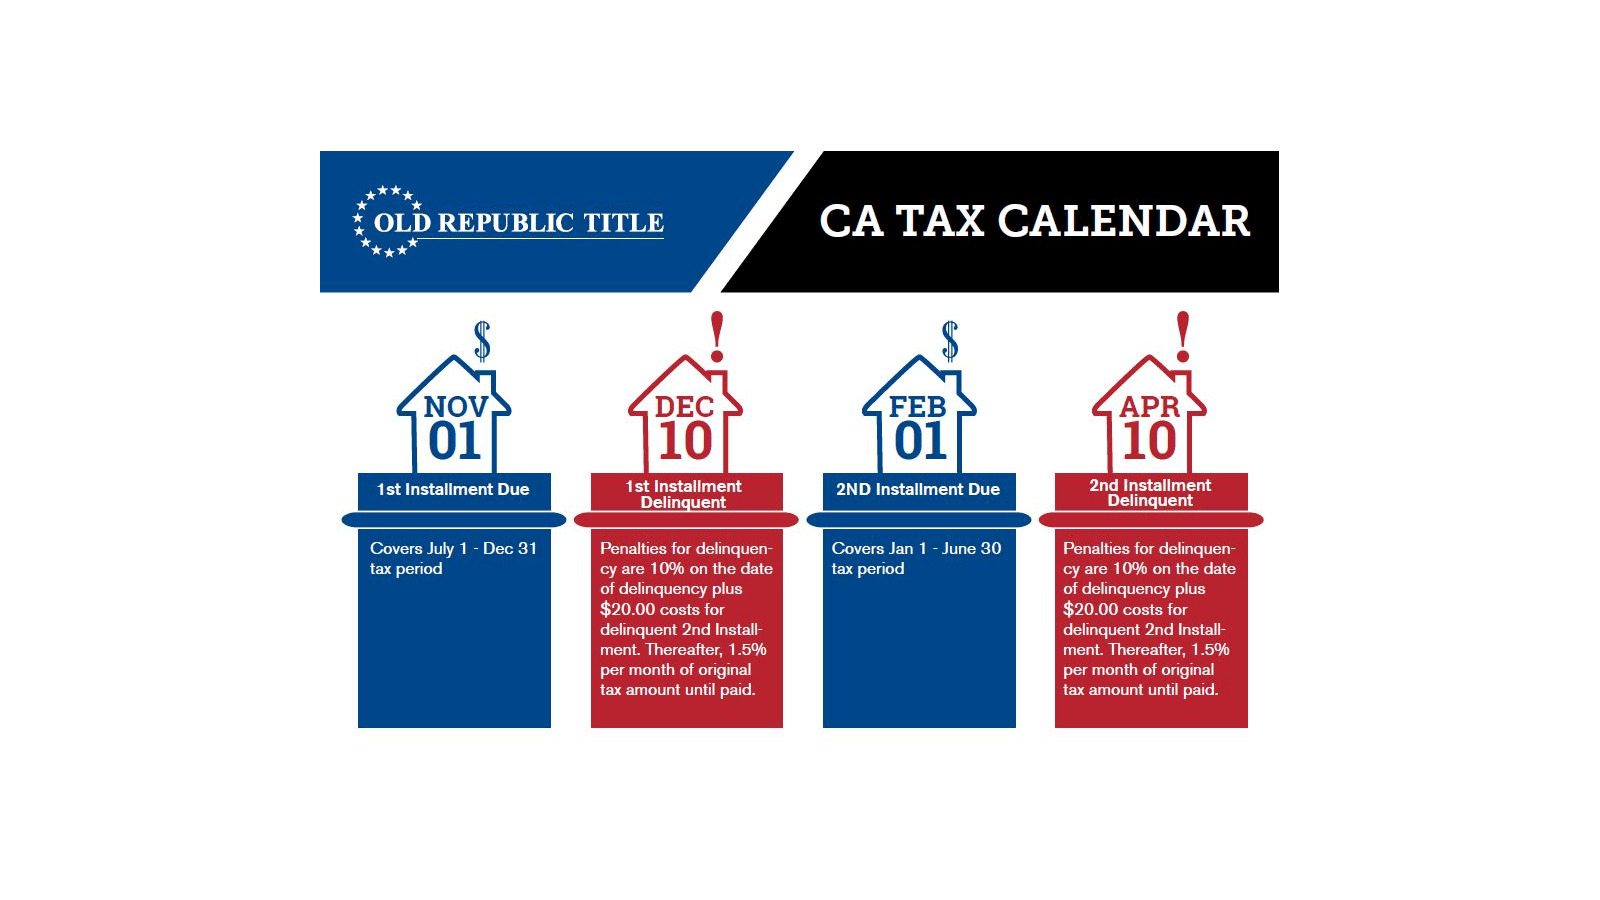 Pressure Mounts For Property Tax Relief CA Home Owners